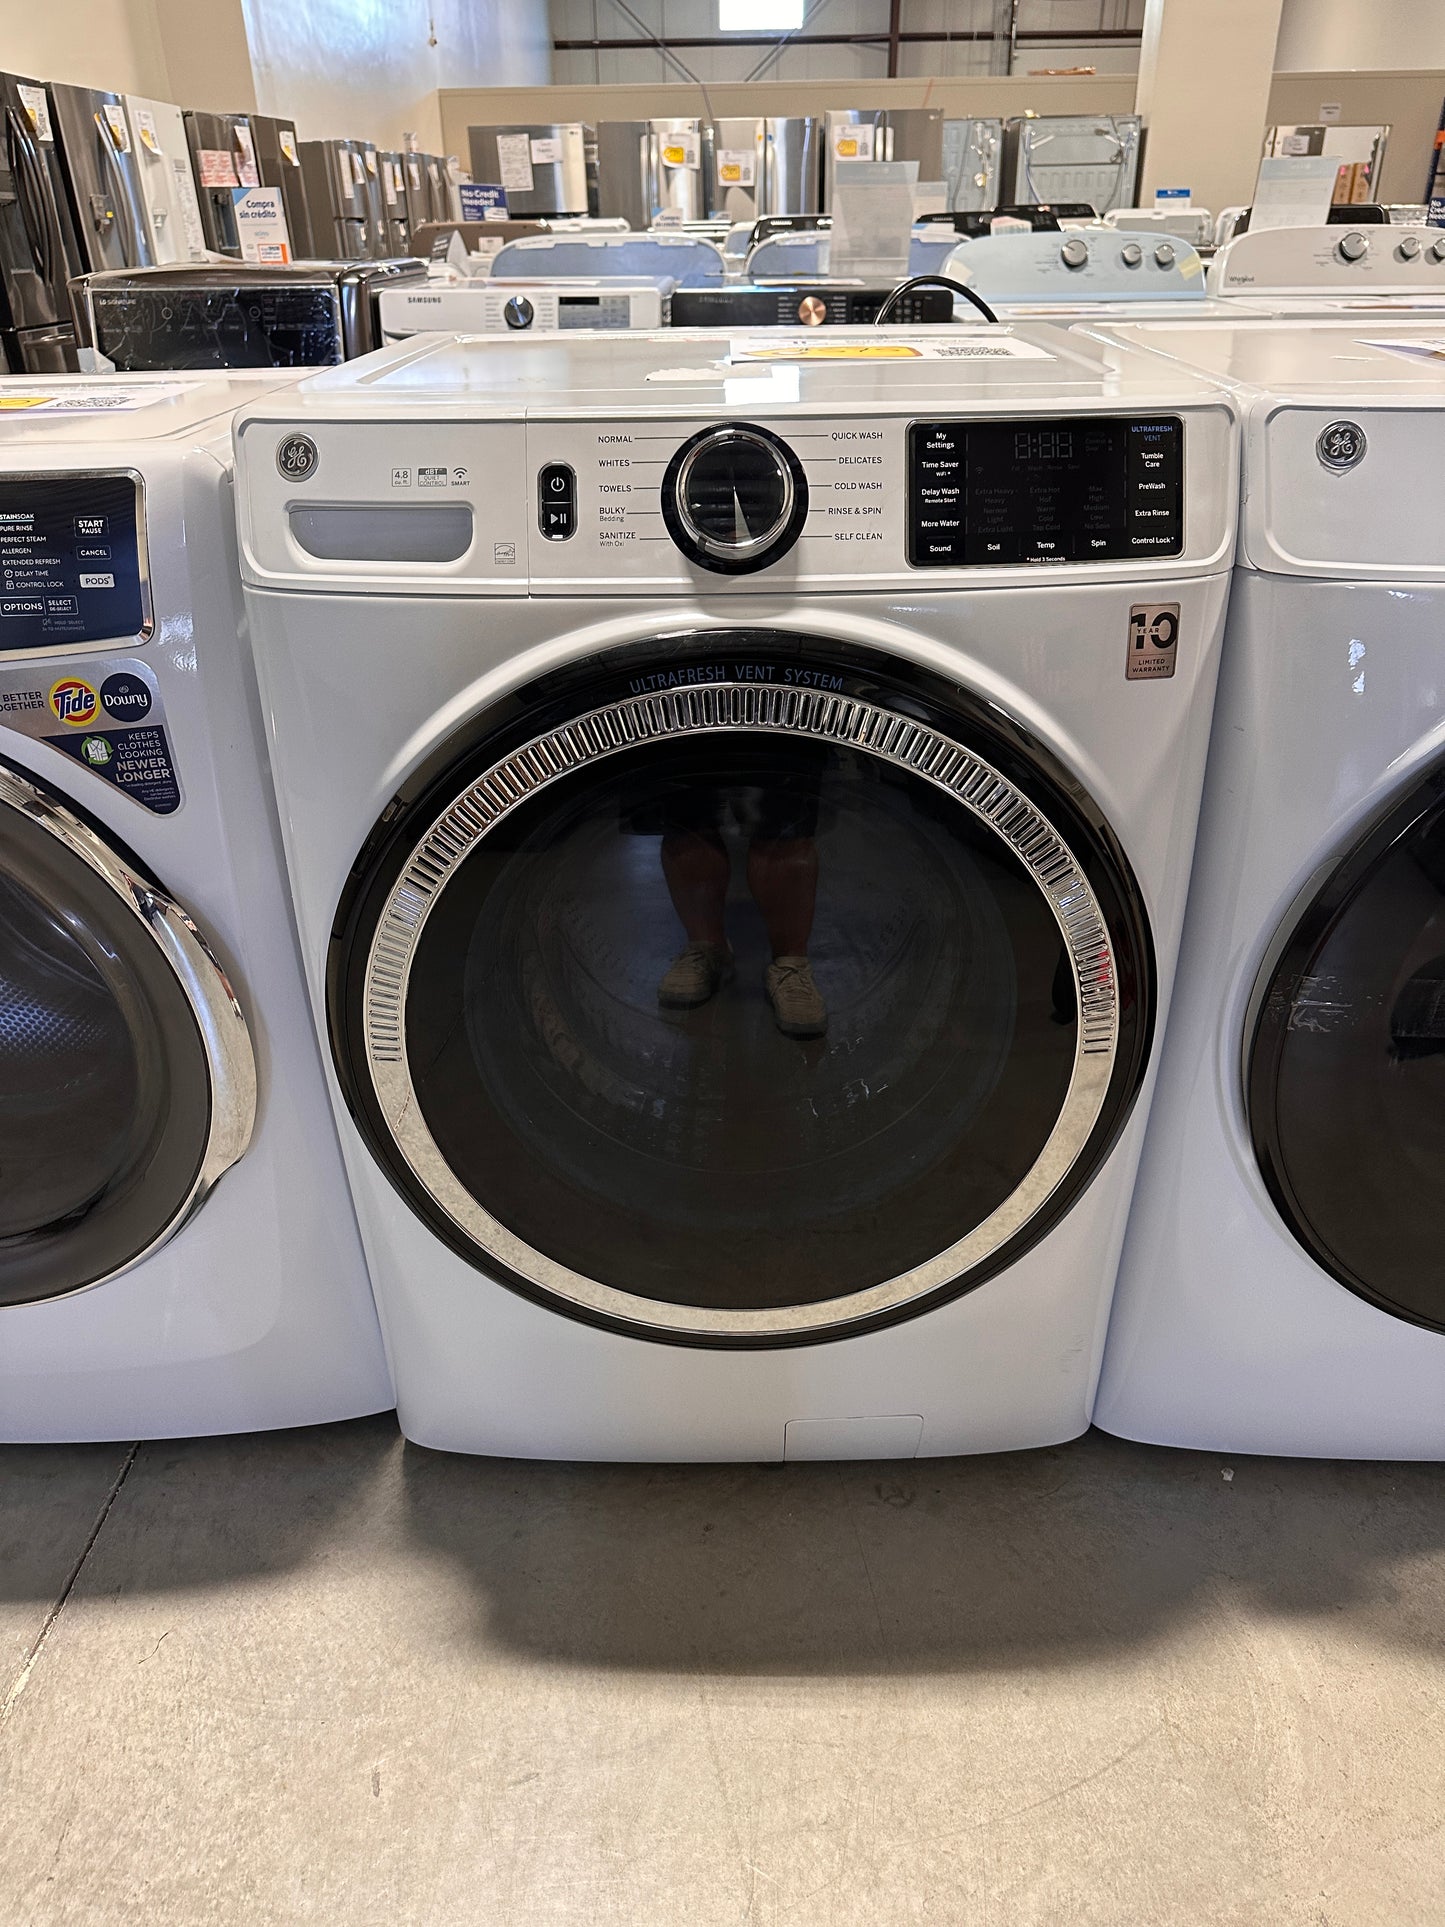 GREAT NEW GE STACKABLE FRONT LOAD WASHER MODEL: GFW550SSNWW  WAS12904